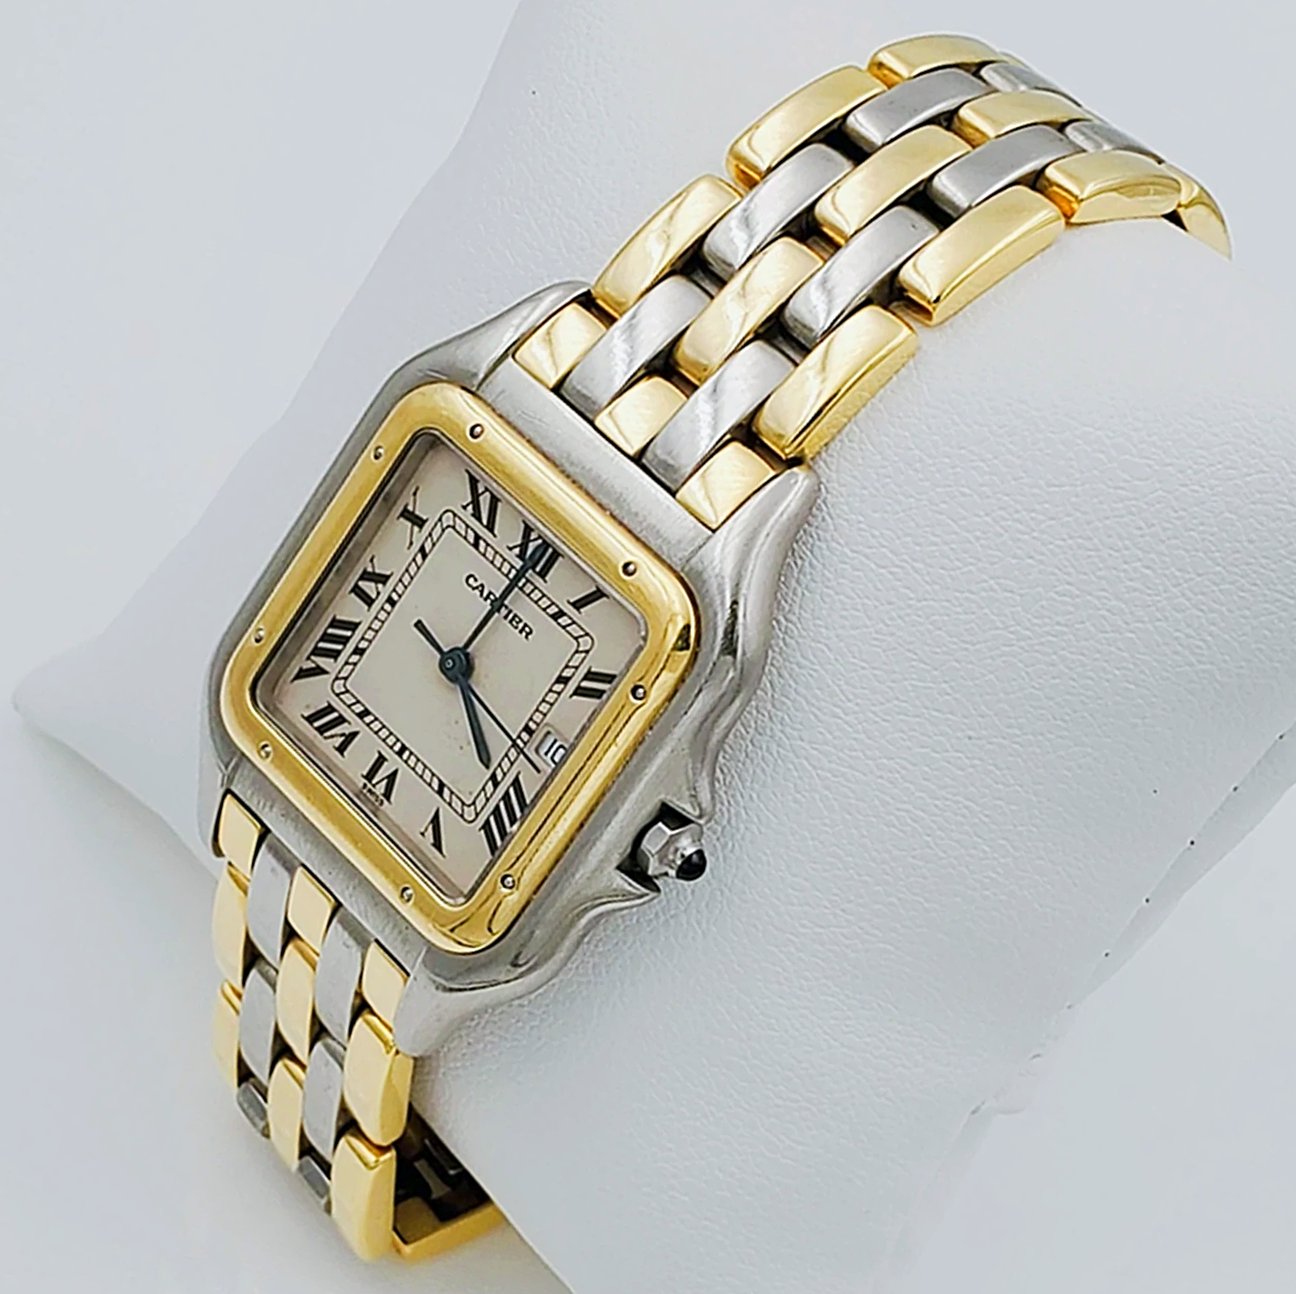 Ladies Medium Cartier Panthere Watch in 18K Yellow Gold and Stainless Steel, with White Dial. (Pre-Owned)